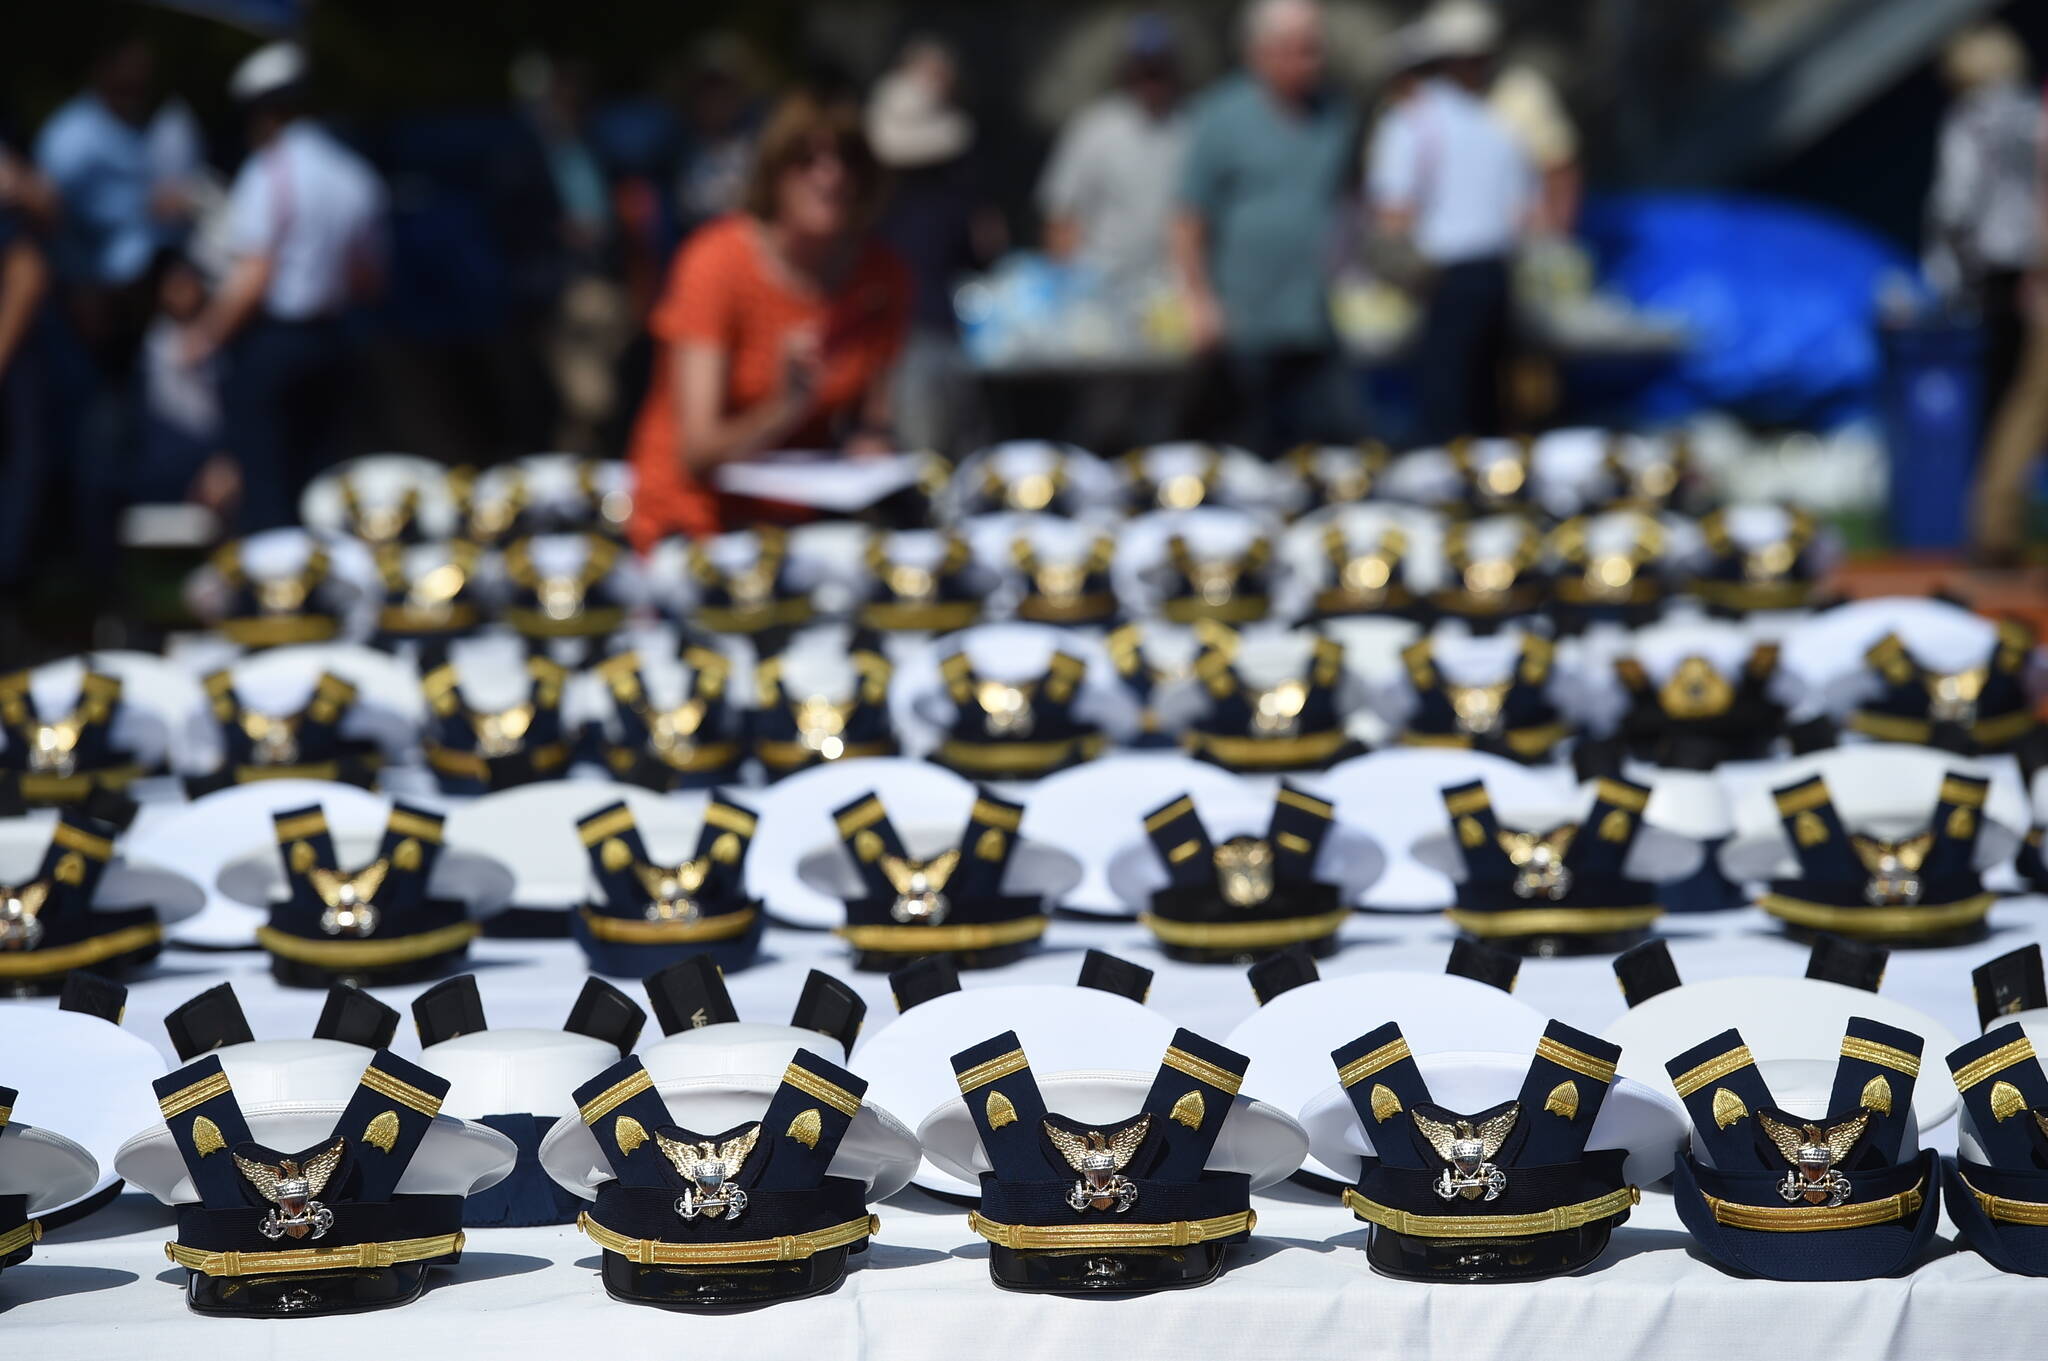 The new hats and shoulder bars for the graduates sit on a table before the start of the U.S. Coast Guard Academy’s 141st Commencement Exercises Wednesday, May 18, 2022 in New London, Conn. The Coast Guard Academy is “disenrolling” seven cadets for failing to comply with the military’s COVID-19 vaccination mandate, after their requests for religious exemptions were denied and they were ordered to leave campus. The academy in New London, Connecticut, confirmed the disenrollments Tuesday, Aug. 30, 2022, The Day newspaper reported. (AP Photo / Stephen Dunn, File)